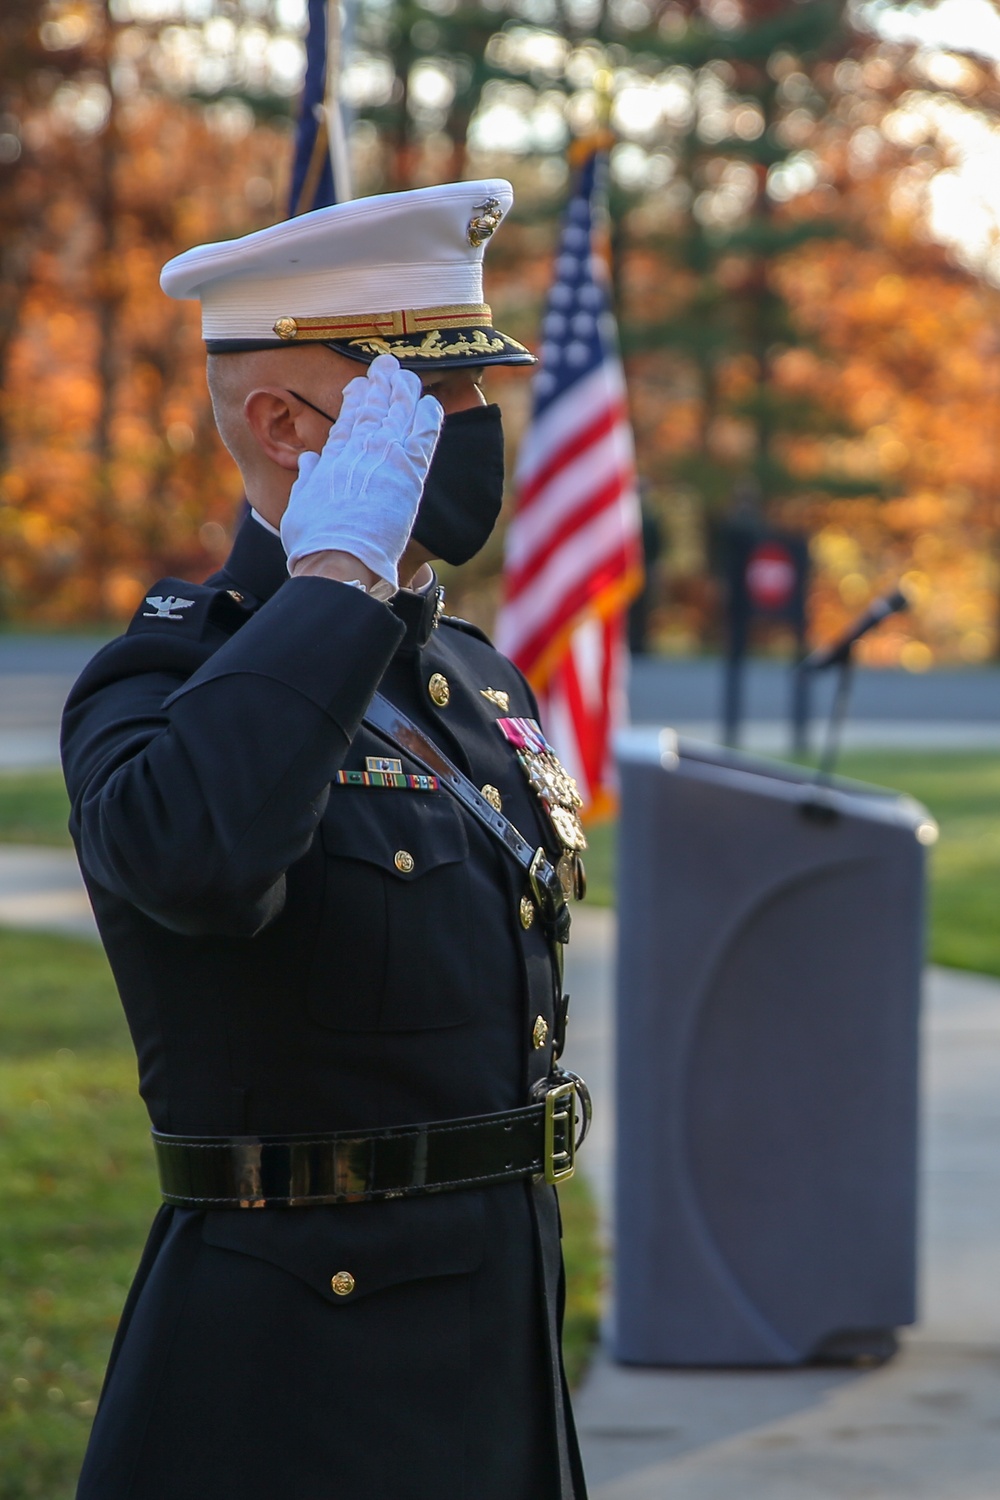 Quantico National Cemetery Wreath Laying